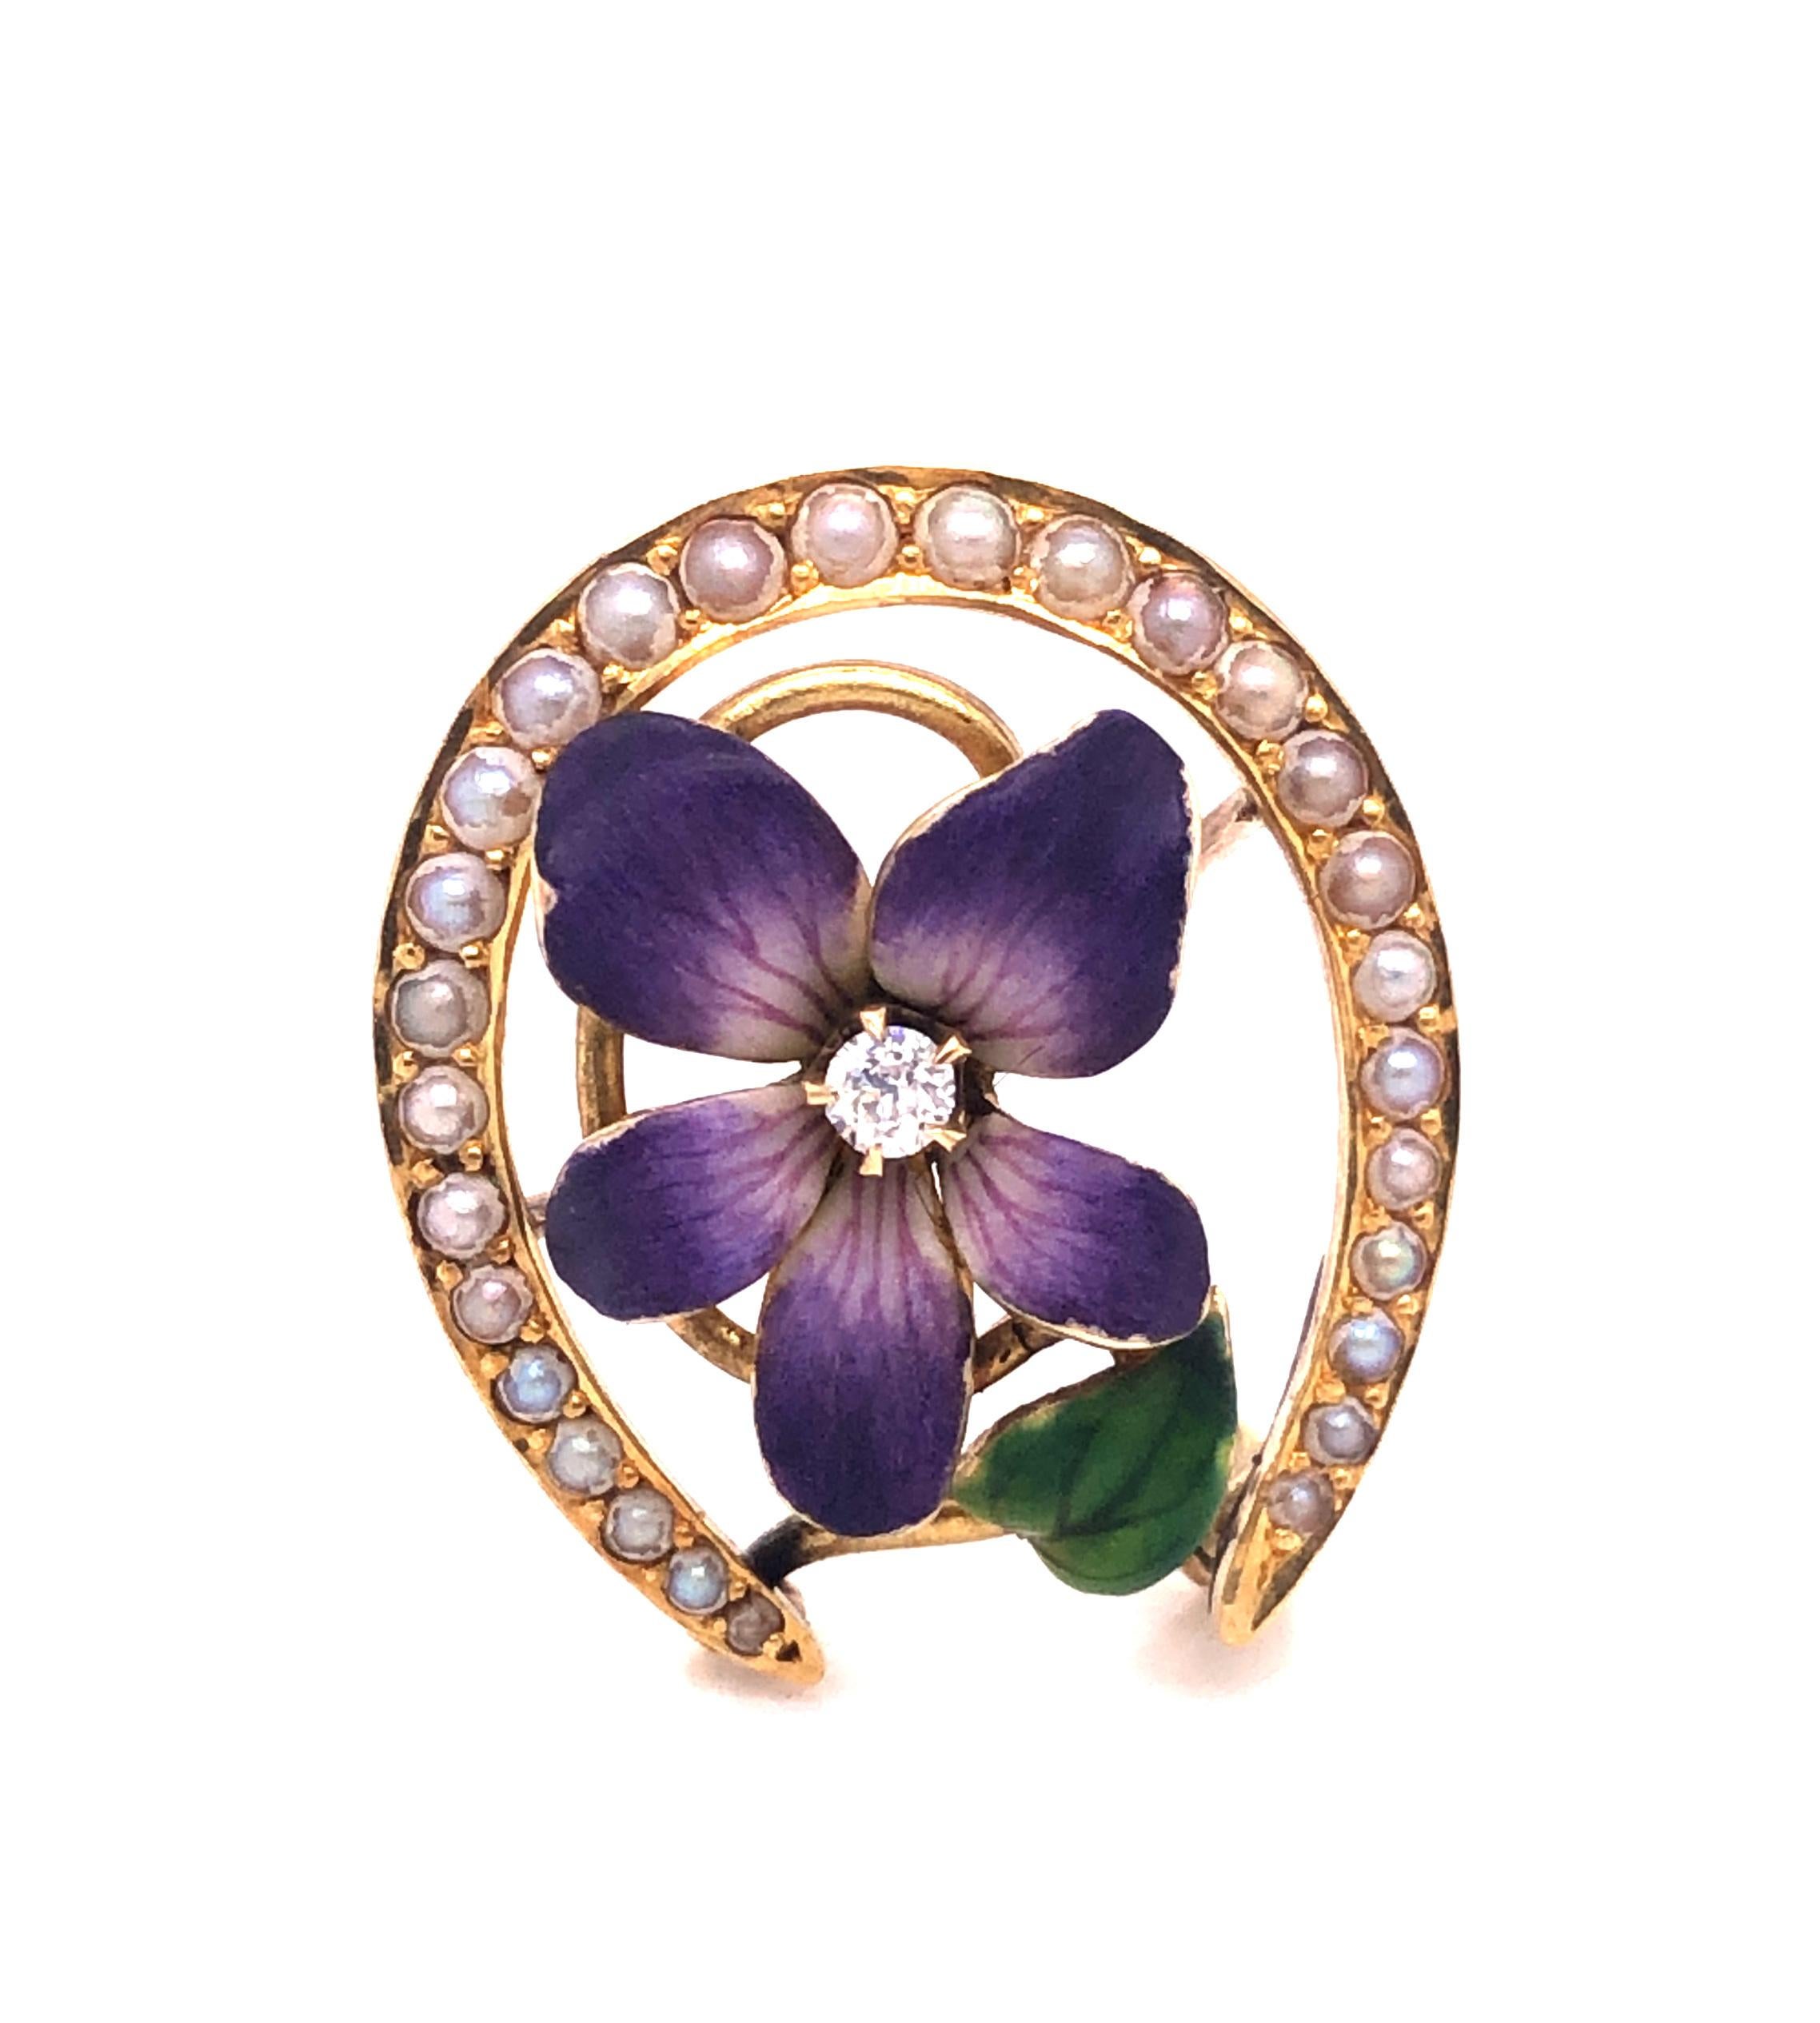 Dating from turn of-the-last-century, a fabulous purple pansy pendant/brooch centered with a sparkling antique round cut diamond. Lavender and white enamel detail the pansy making this piece pop with color. The overlapping petals are colored green